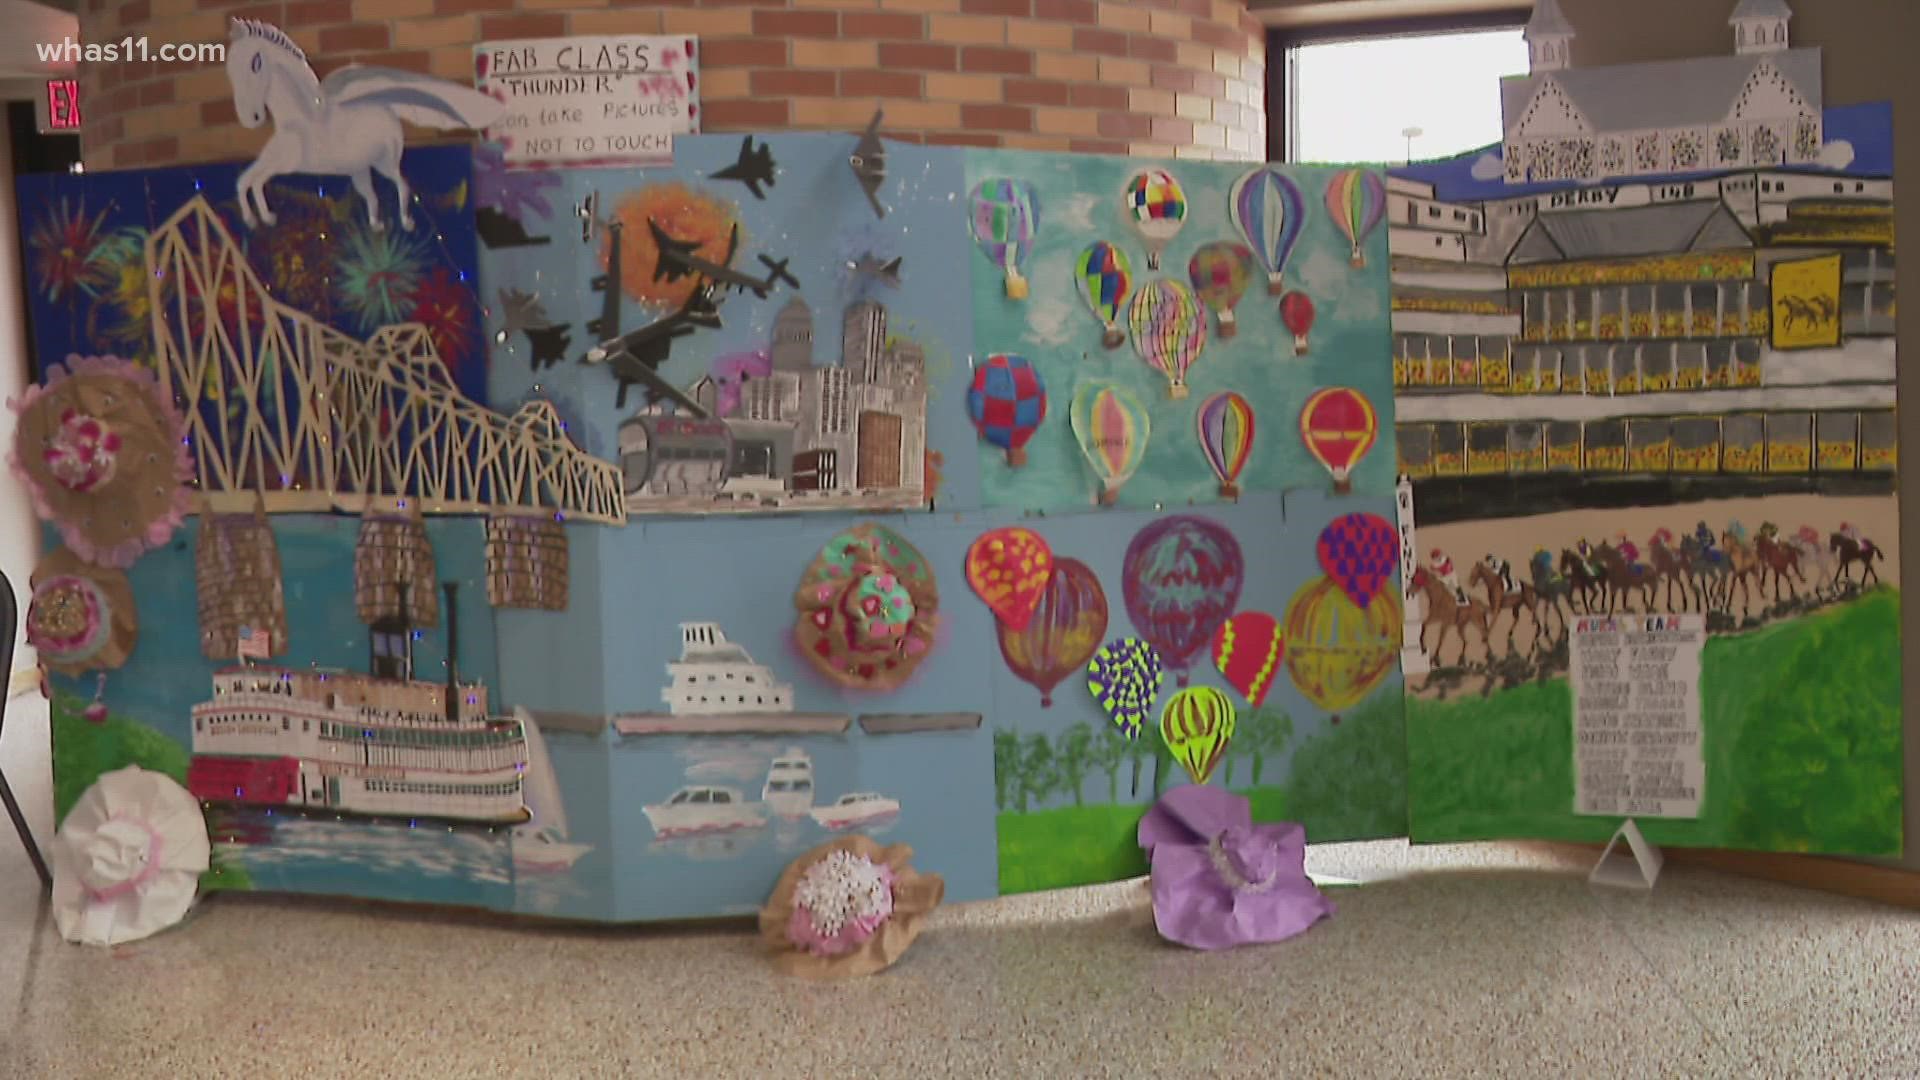 The class painted huge murals of different Kentucky Derby Festival events--from Thunder Over Louisville to the fastest two minutes in sports.